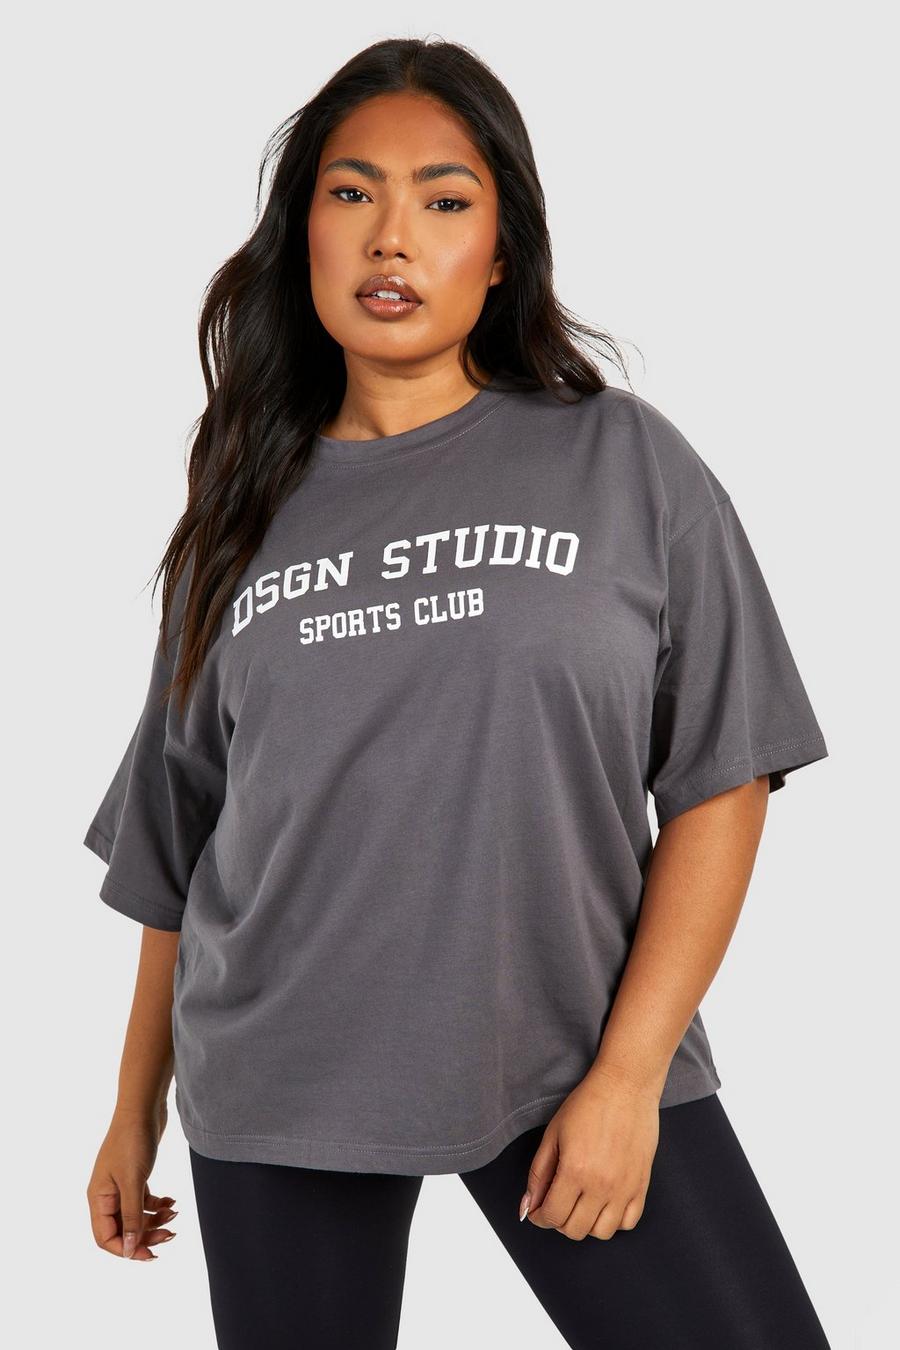 T-shirt Plus Size oversize Dsgn Studio Sports Club, Charcoal image number 1